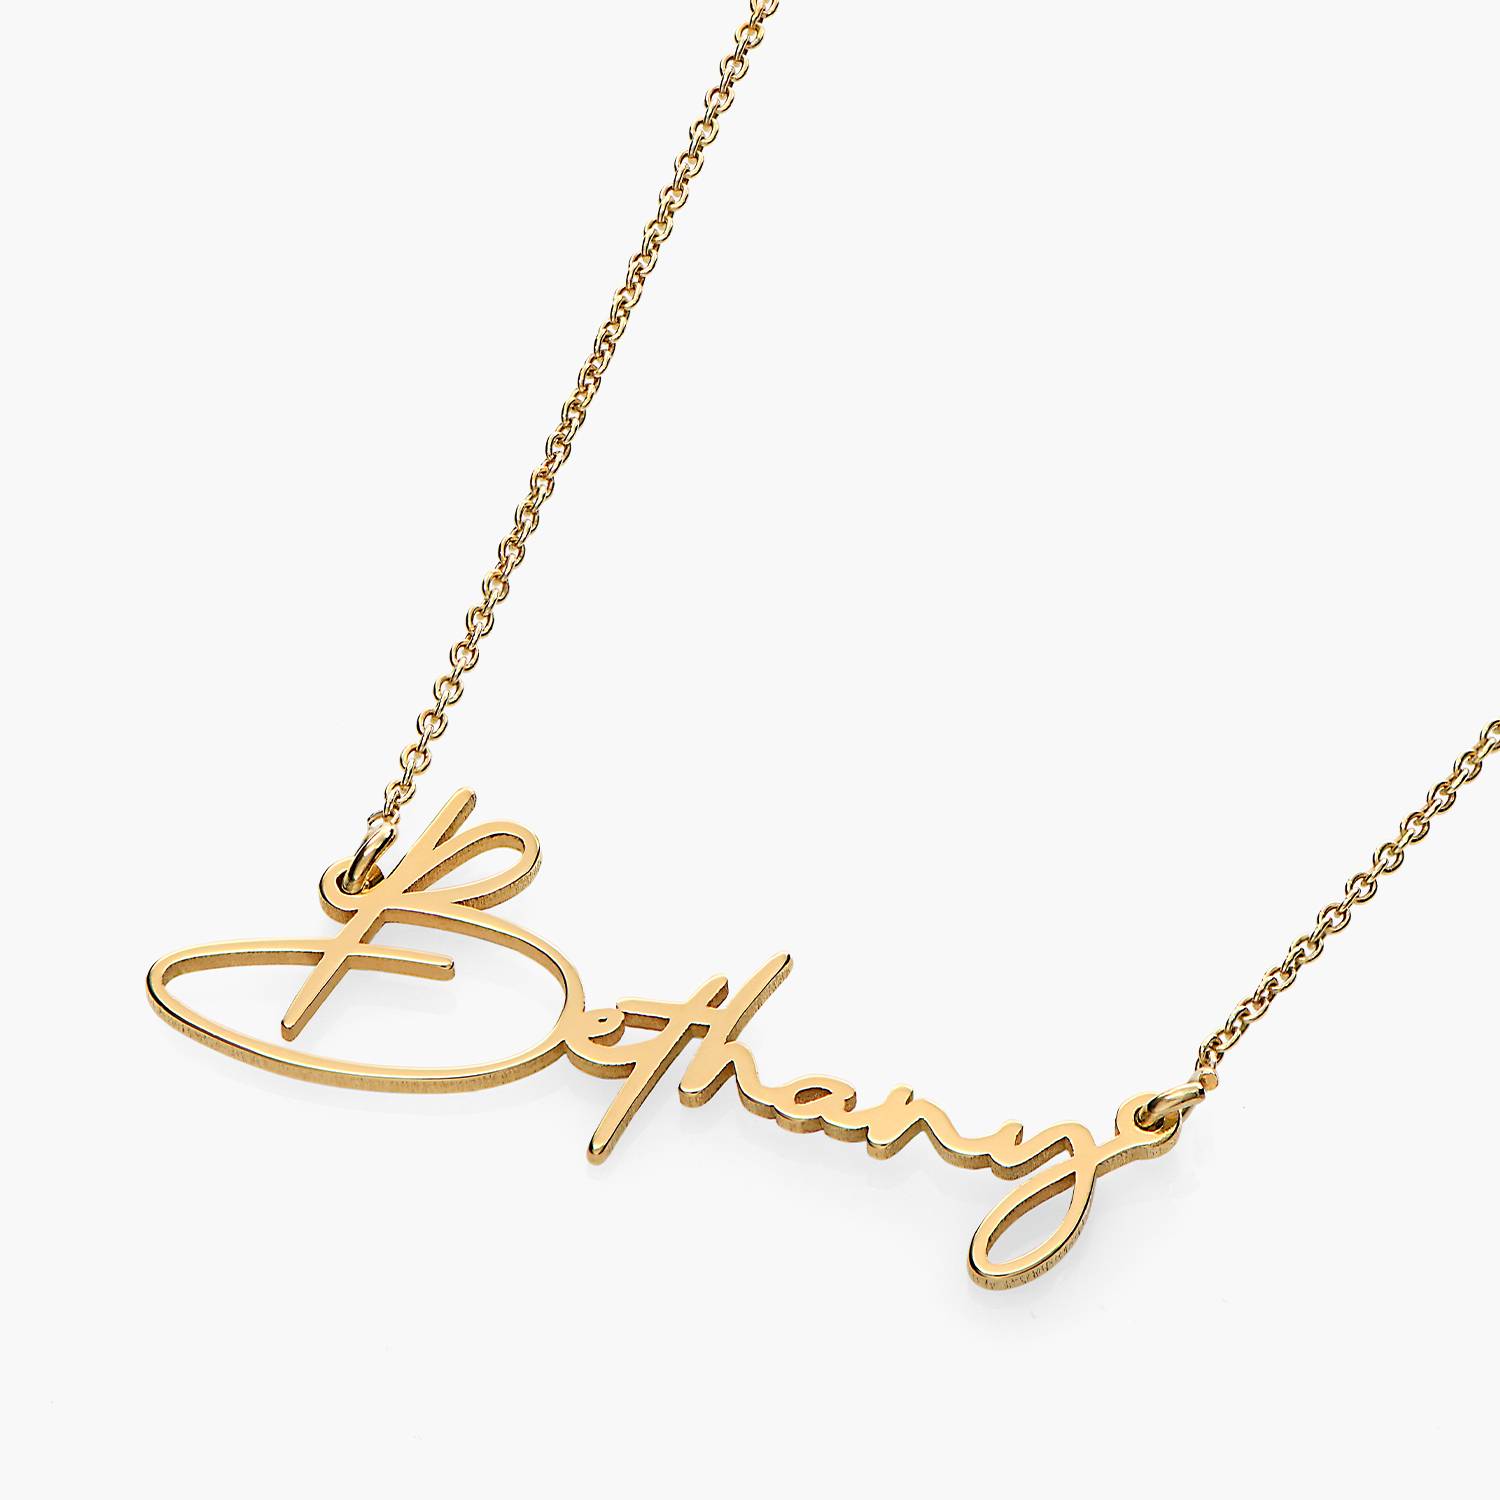 Paris Name Necklace in 18ct Gold Vermeil-2 product photo